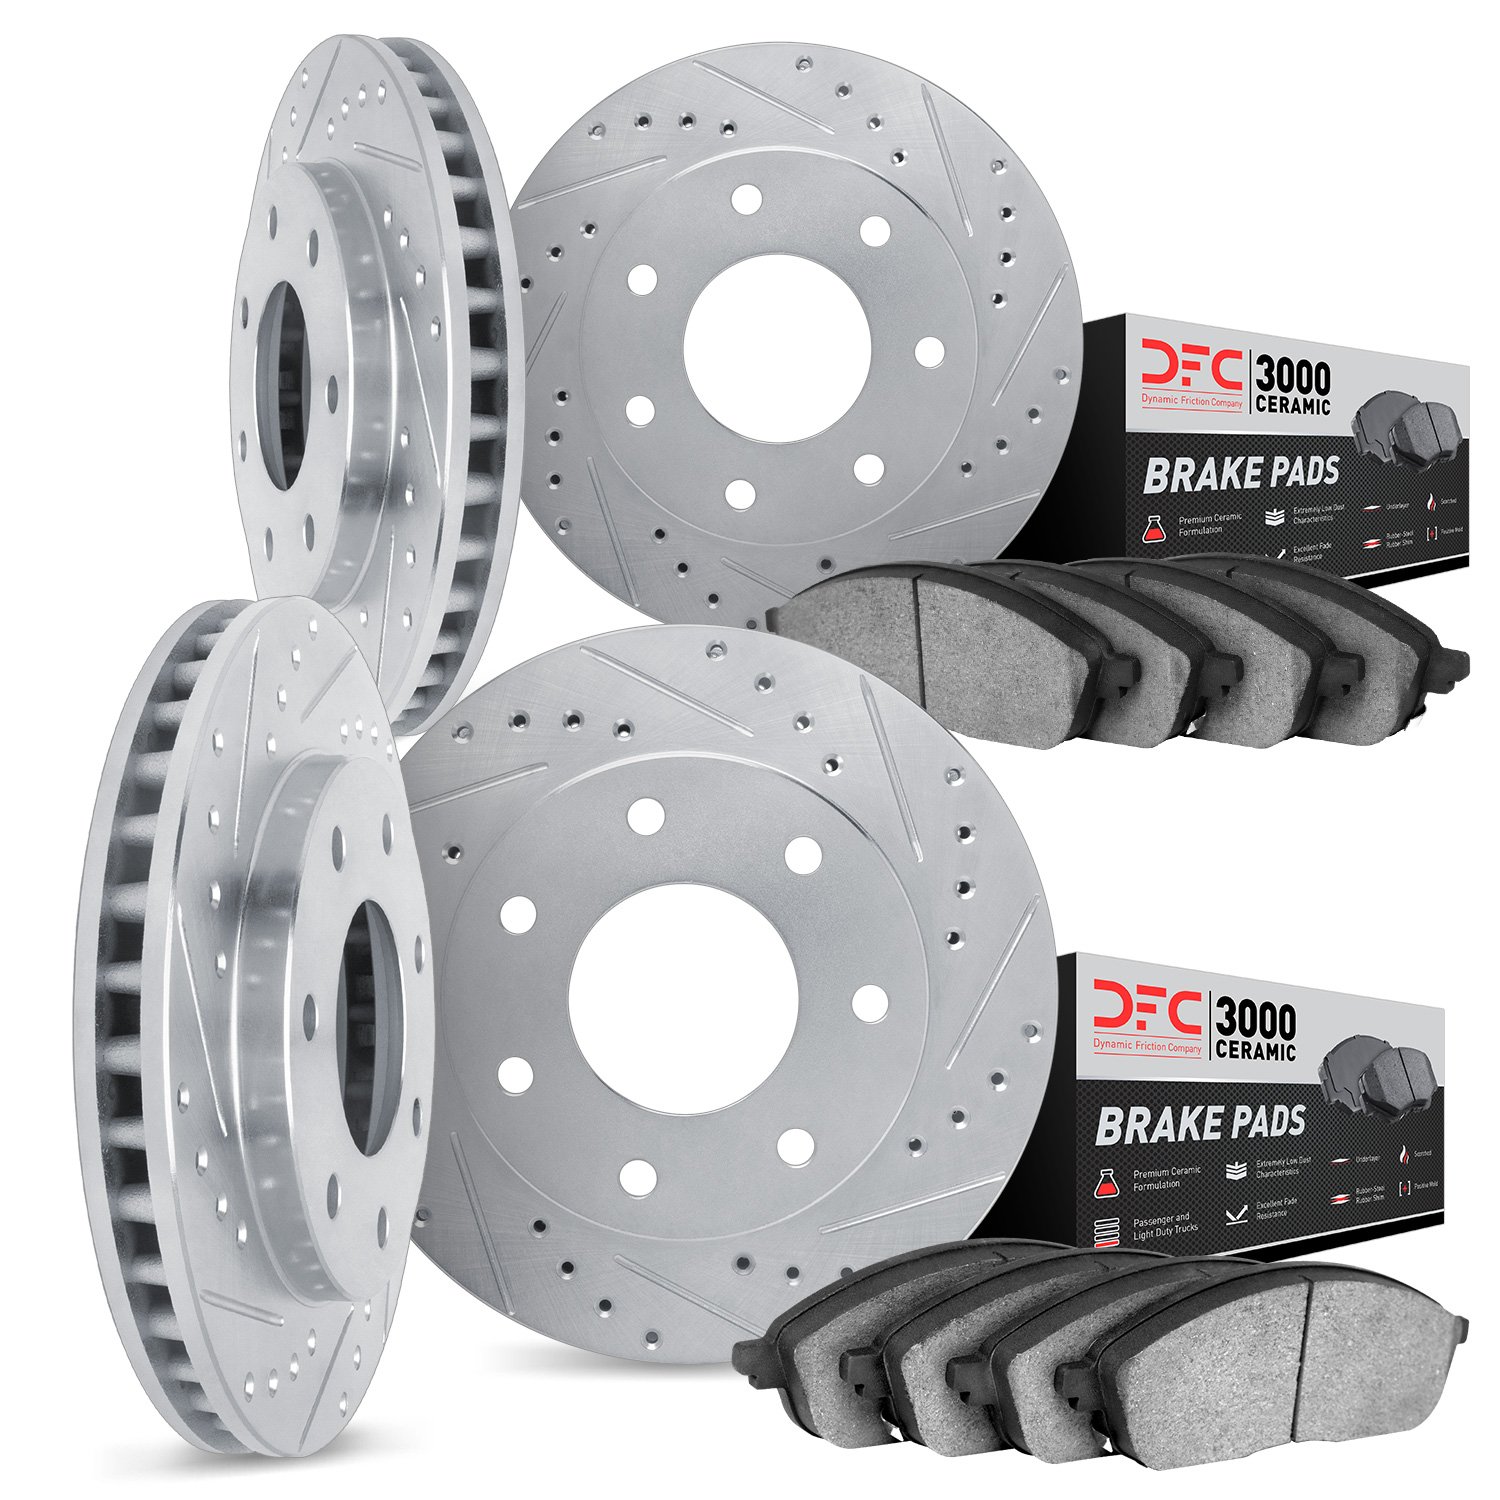 7304-54064 Drilled/Slotted Brake Rotor with 3000-Series Ceramic Brake Pads Kit [Silver], 2004-2008 Ford/Lincoln/Mercury/Mazda, P